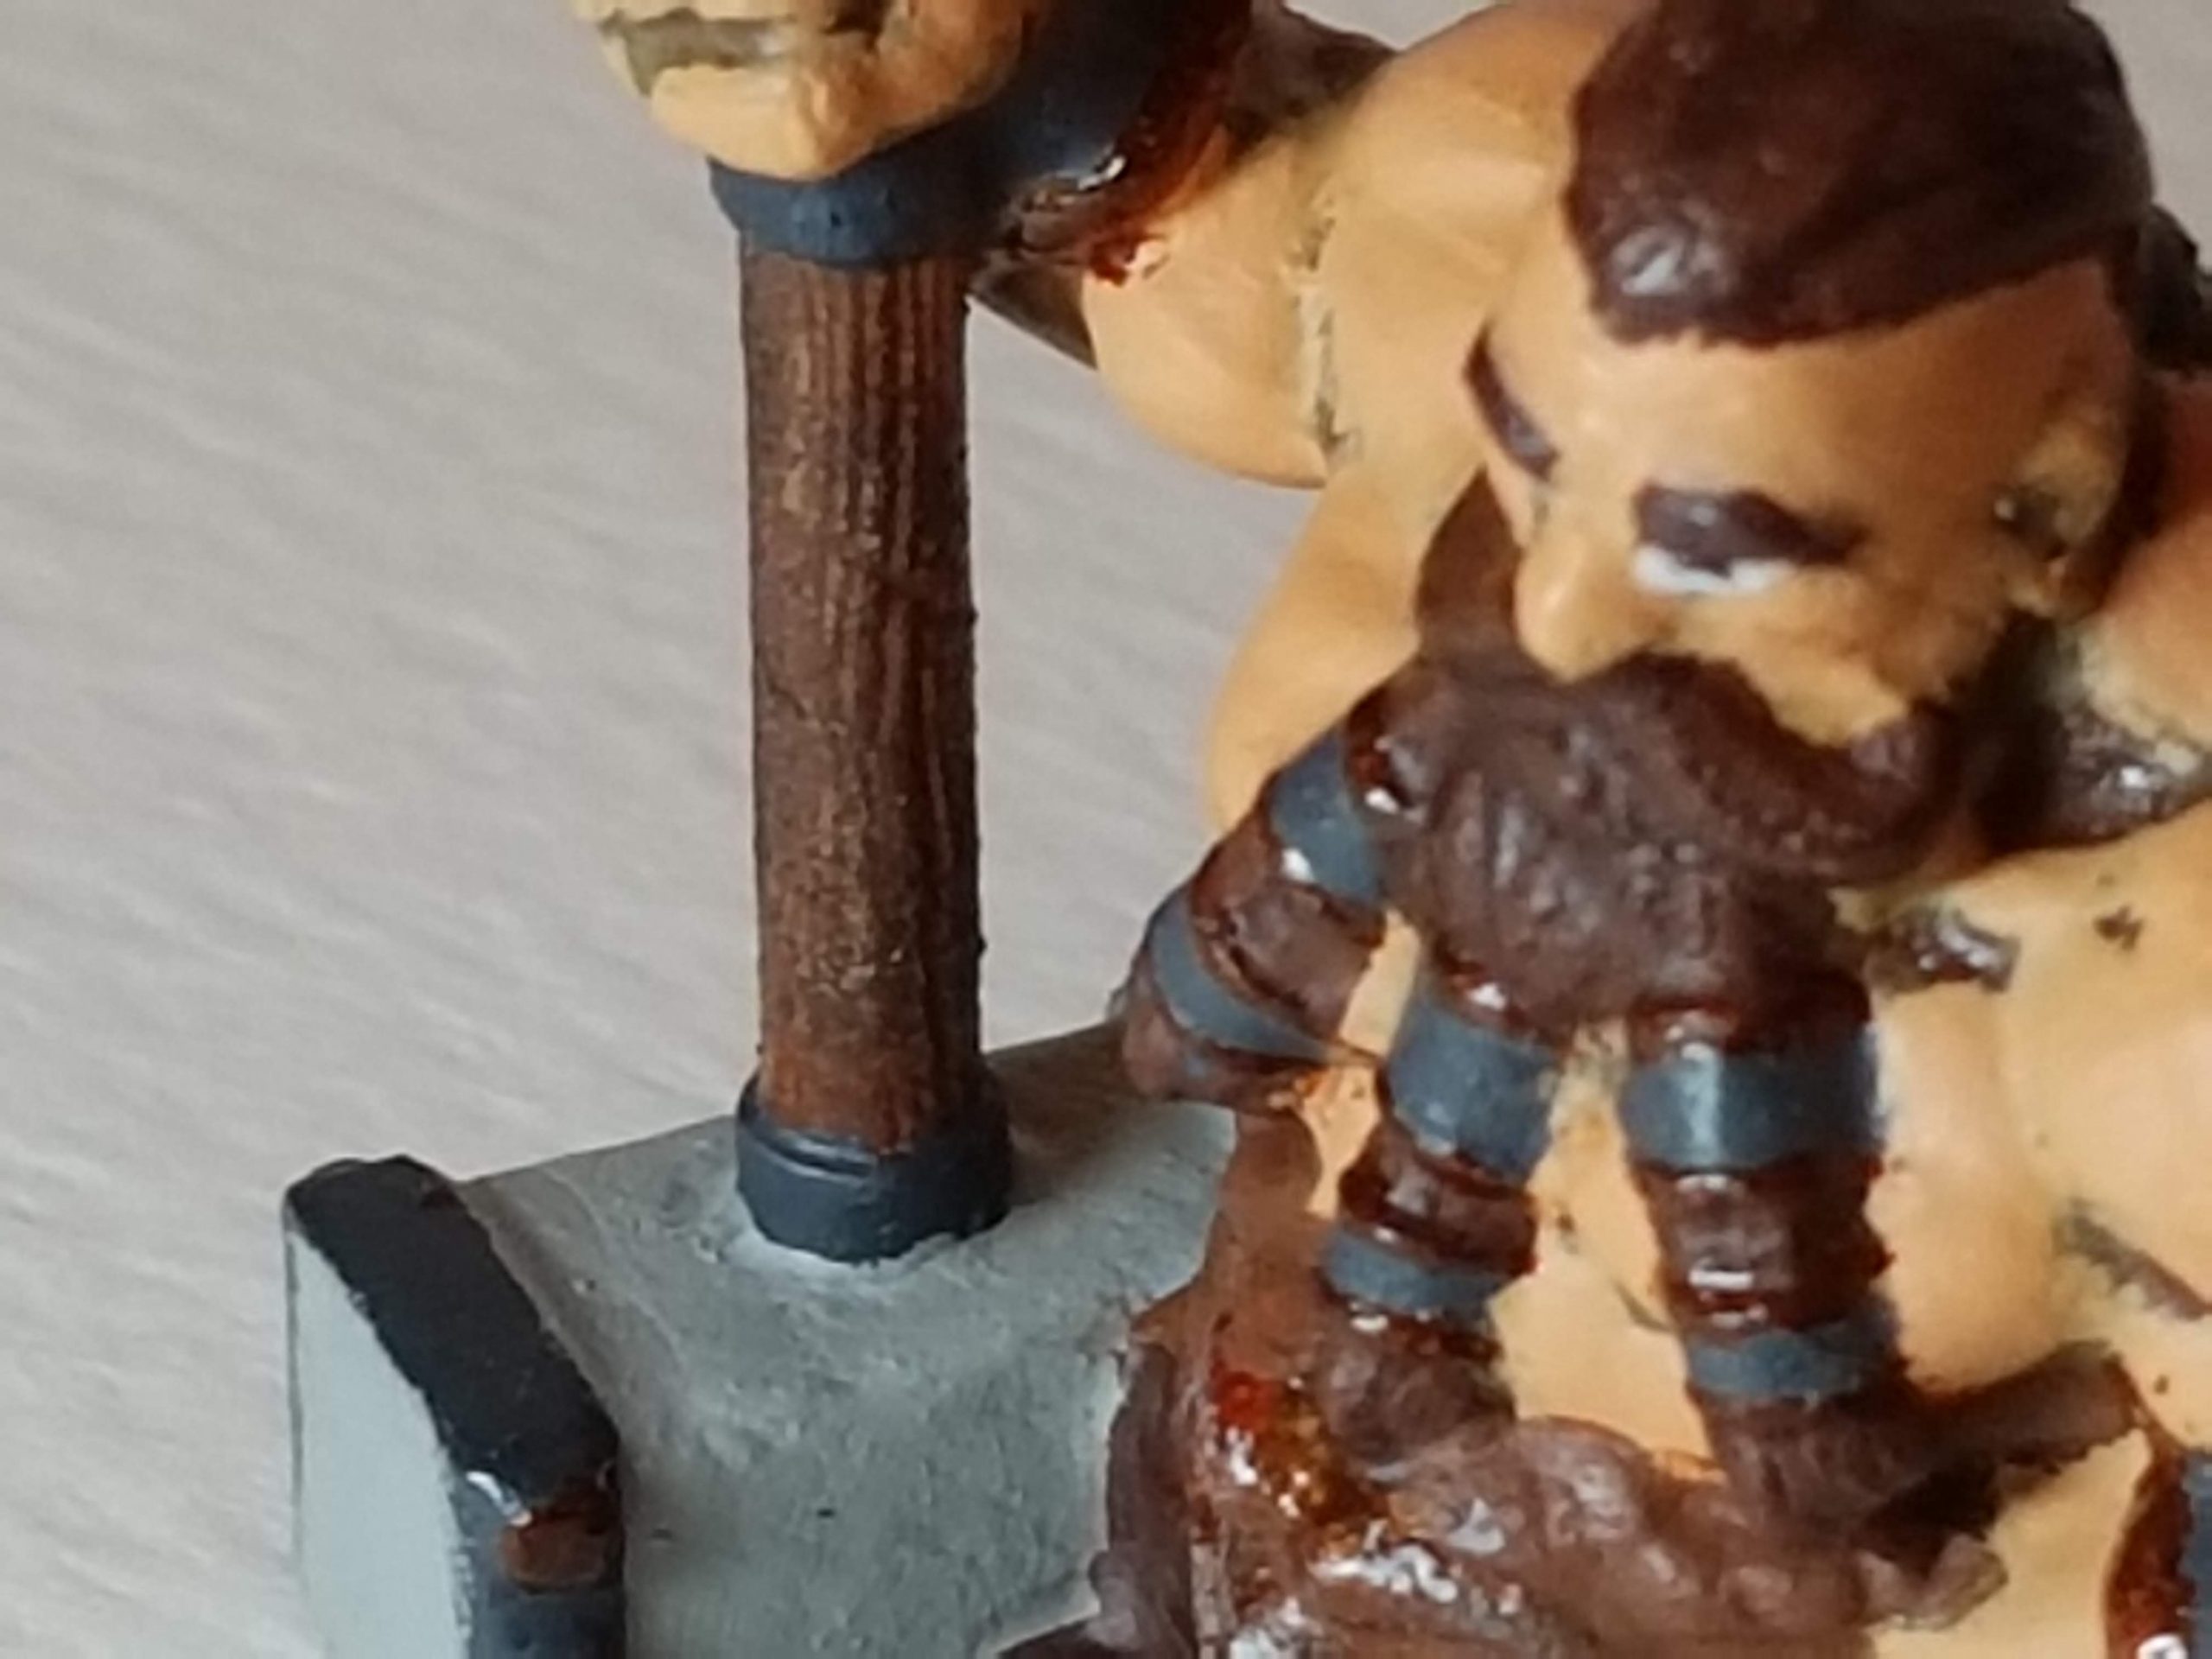 Painted Bjorn Steeleblood (Dwarf) - Closeup on Wood Handle - 28mm Scale - 3D Printed By Wright Built on Sparkmaker FHD - Designed by Capritor (Thingiverse)